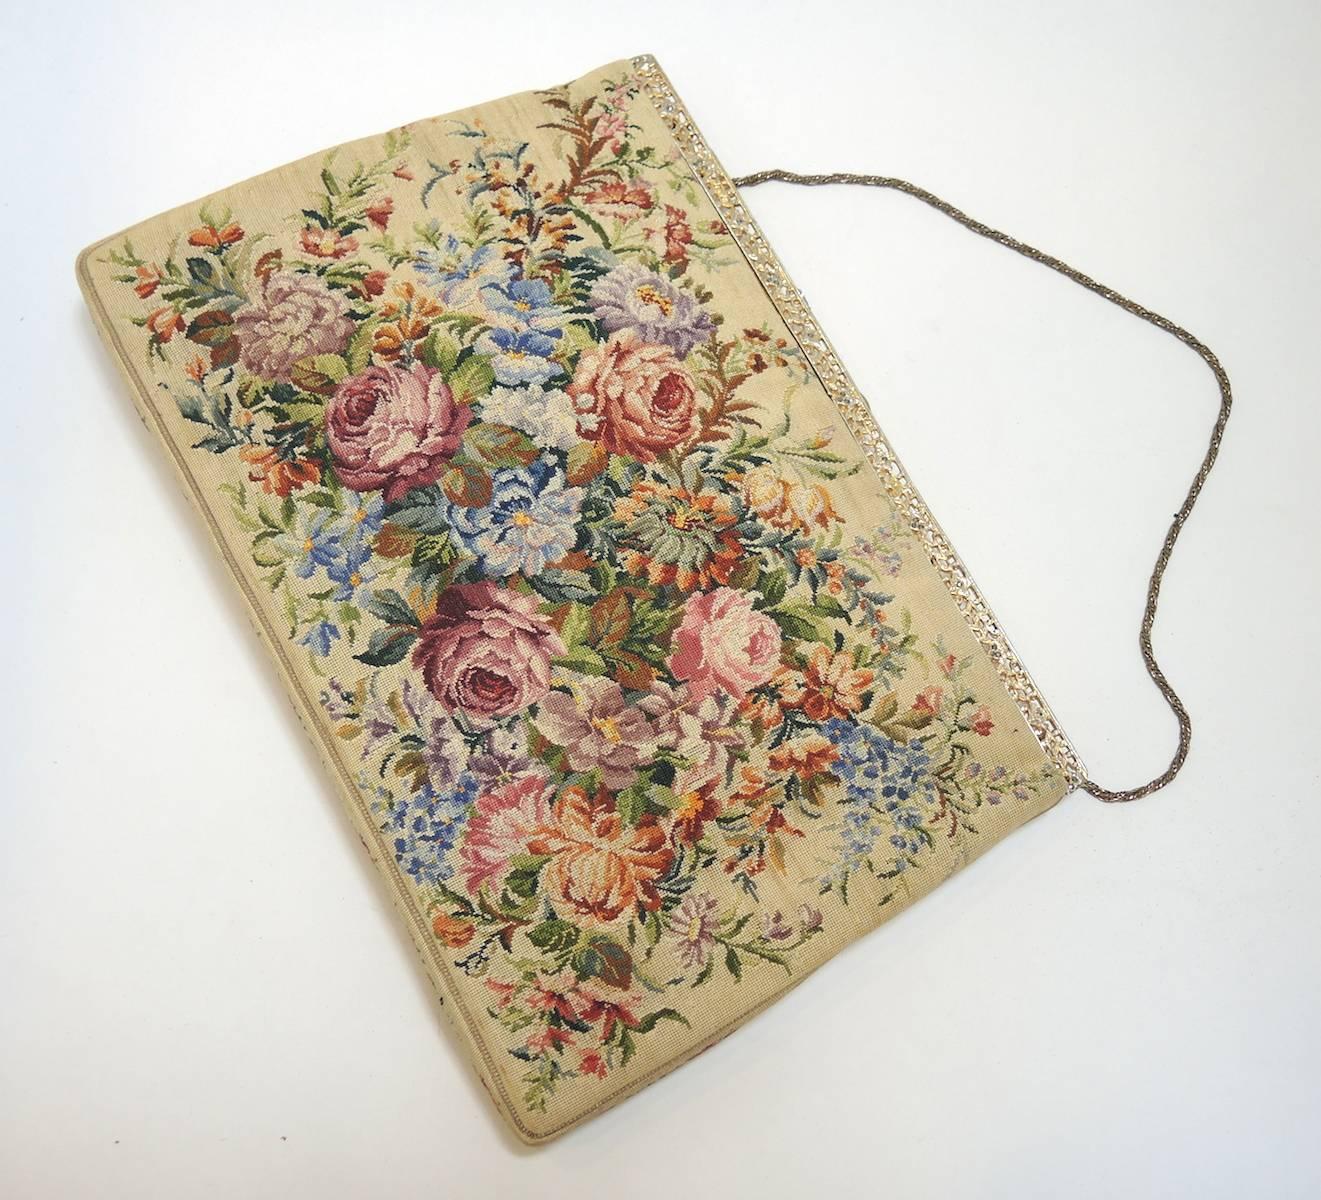 This tapestry purse is the best of vintage tapestries purses.  It is filled with muted multi-colored flowers that cascade into  a stunning pattern across the purse.  It measures 10” x 7” and is in excellent condition.